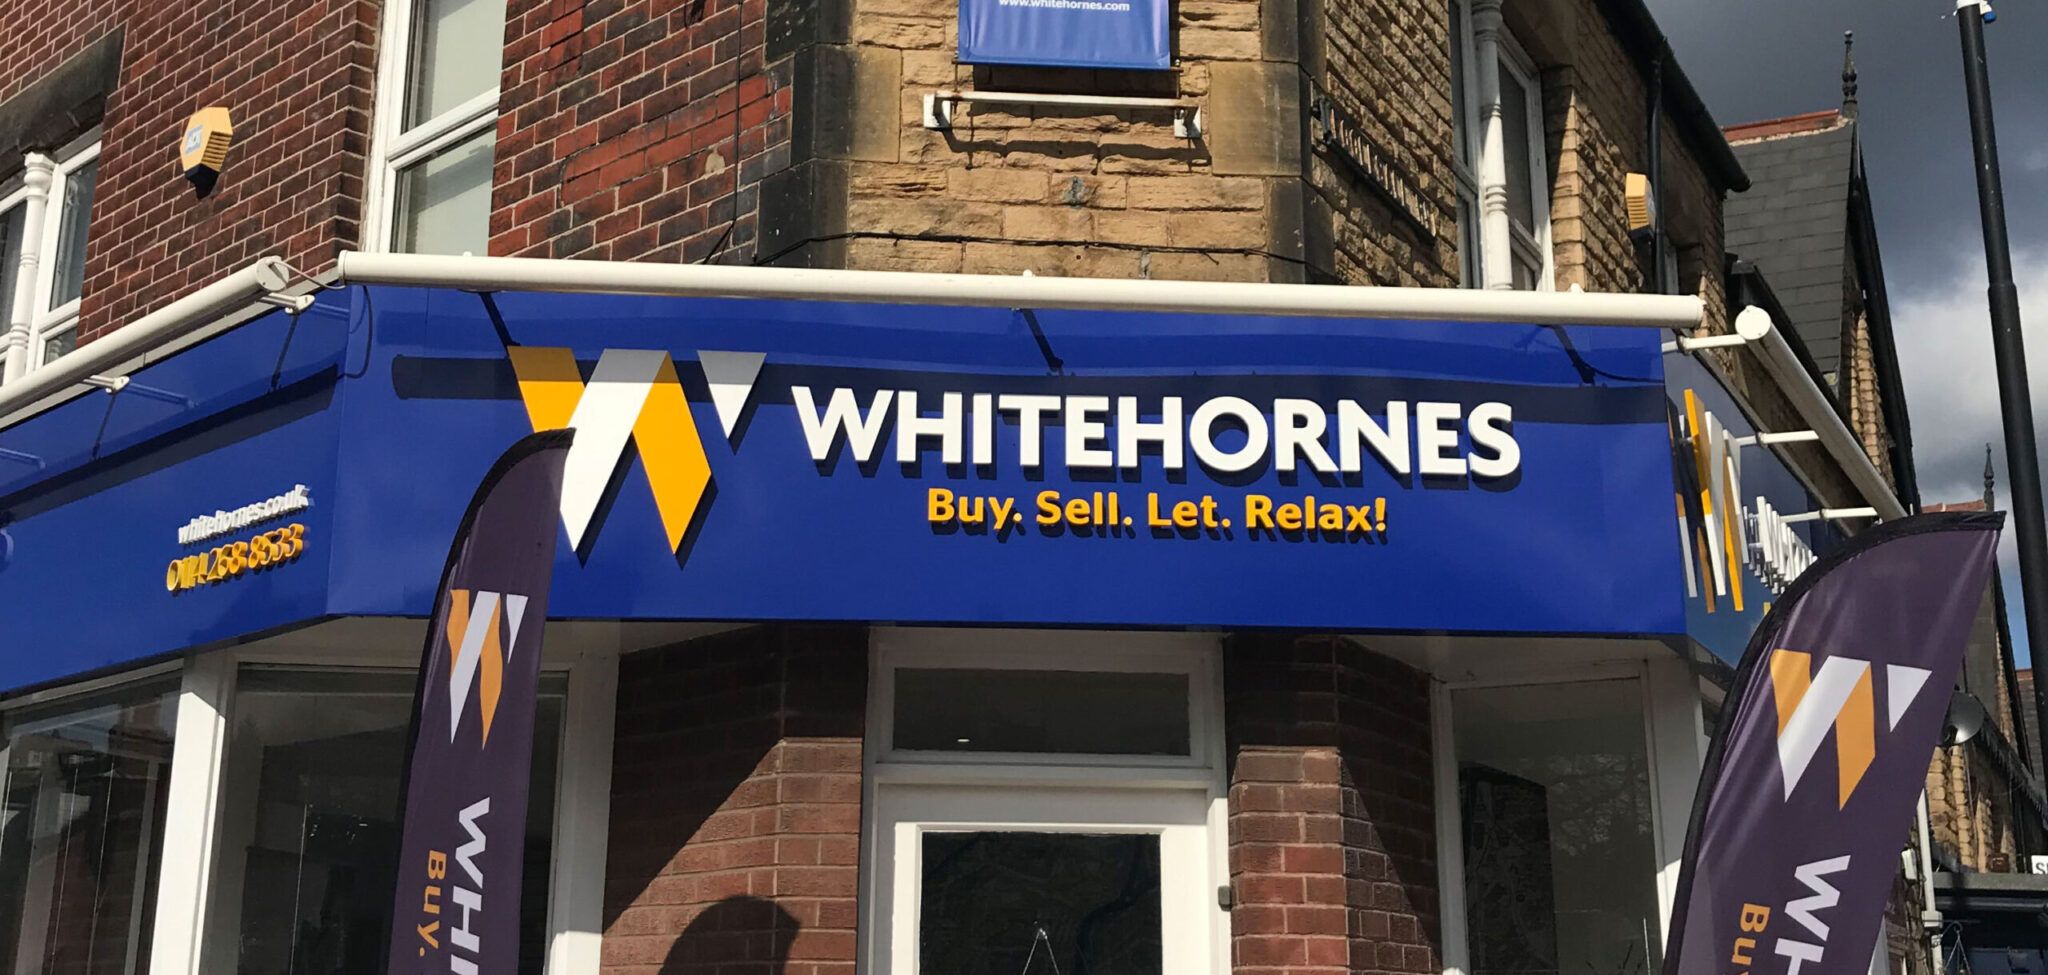 About Whitehornes